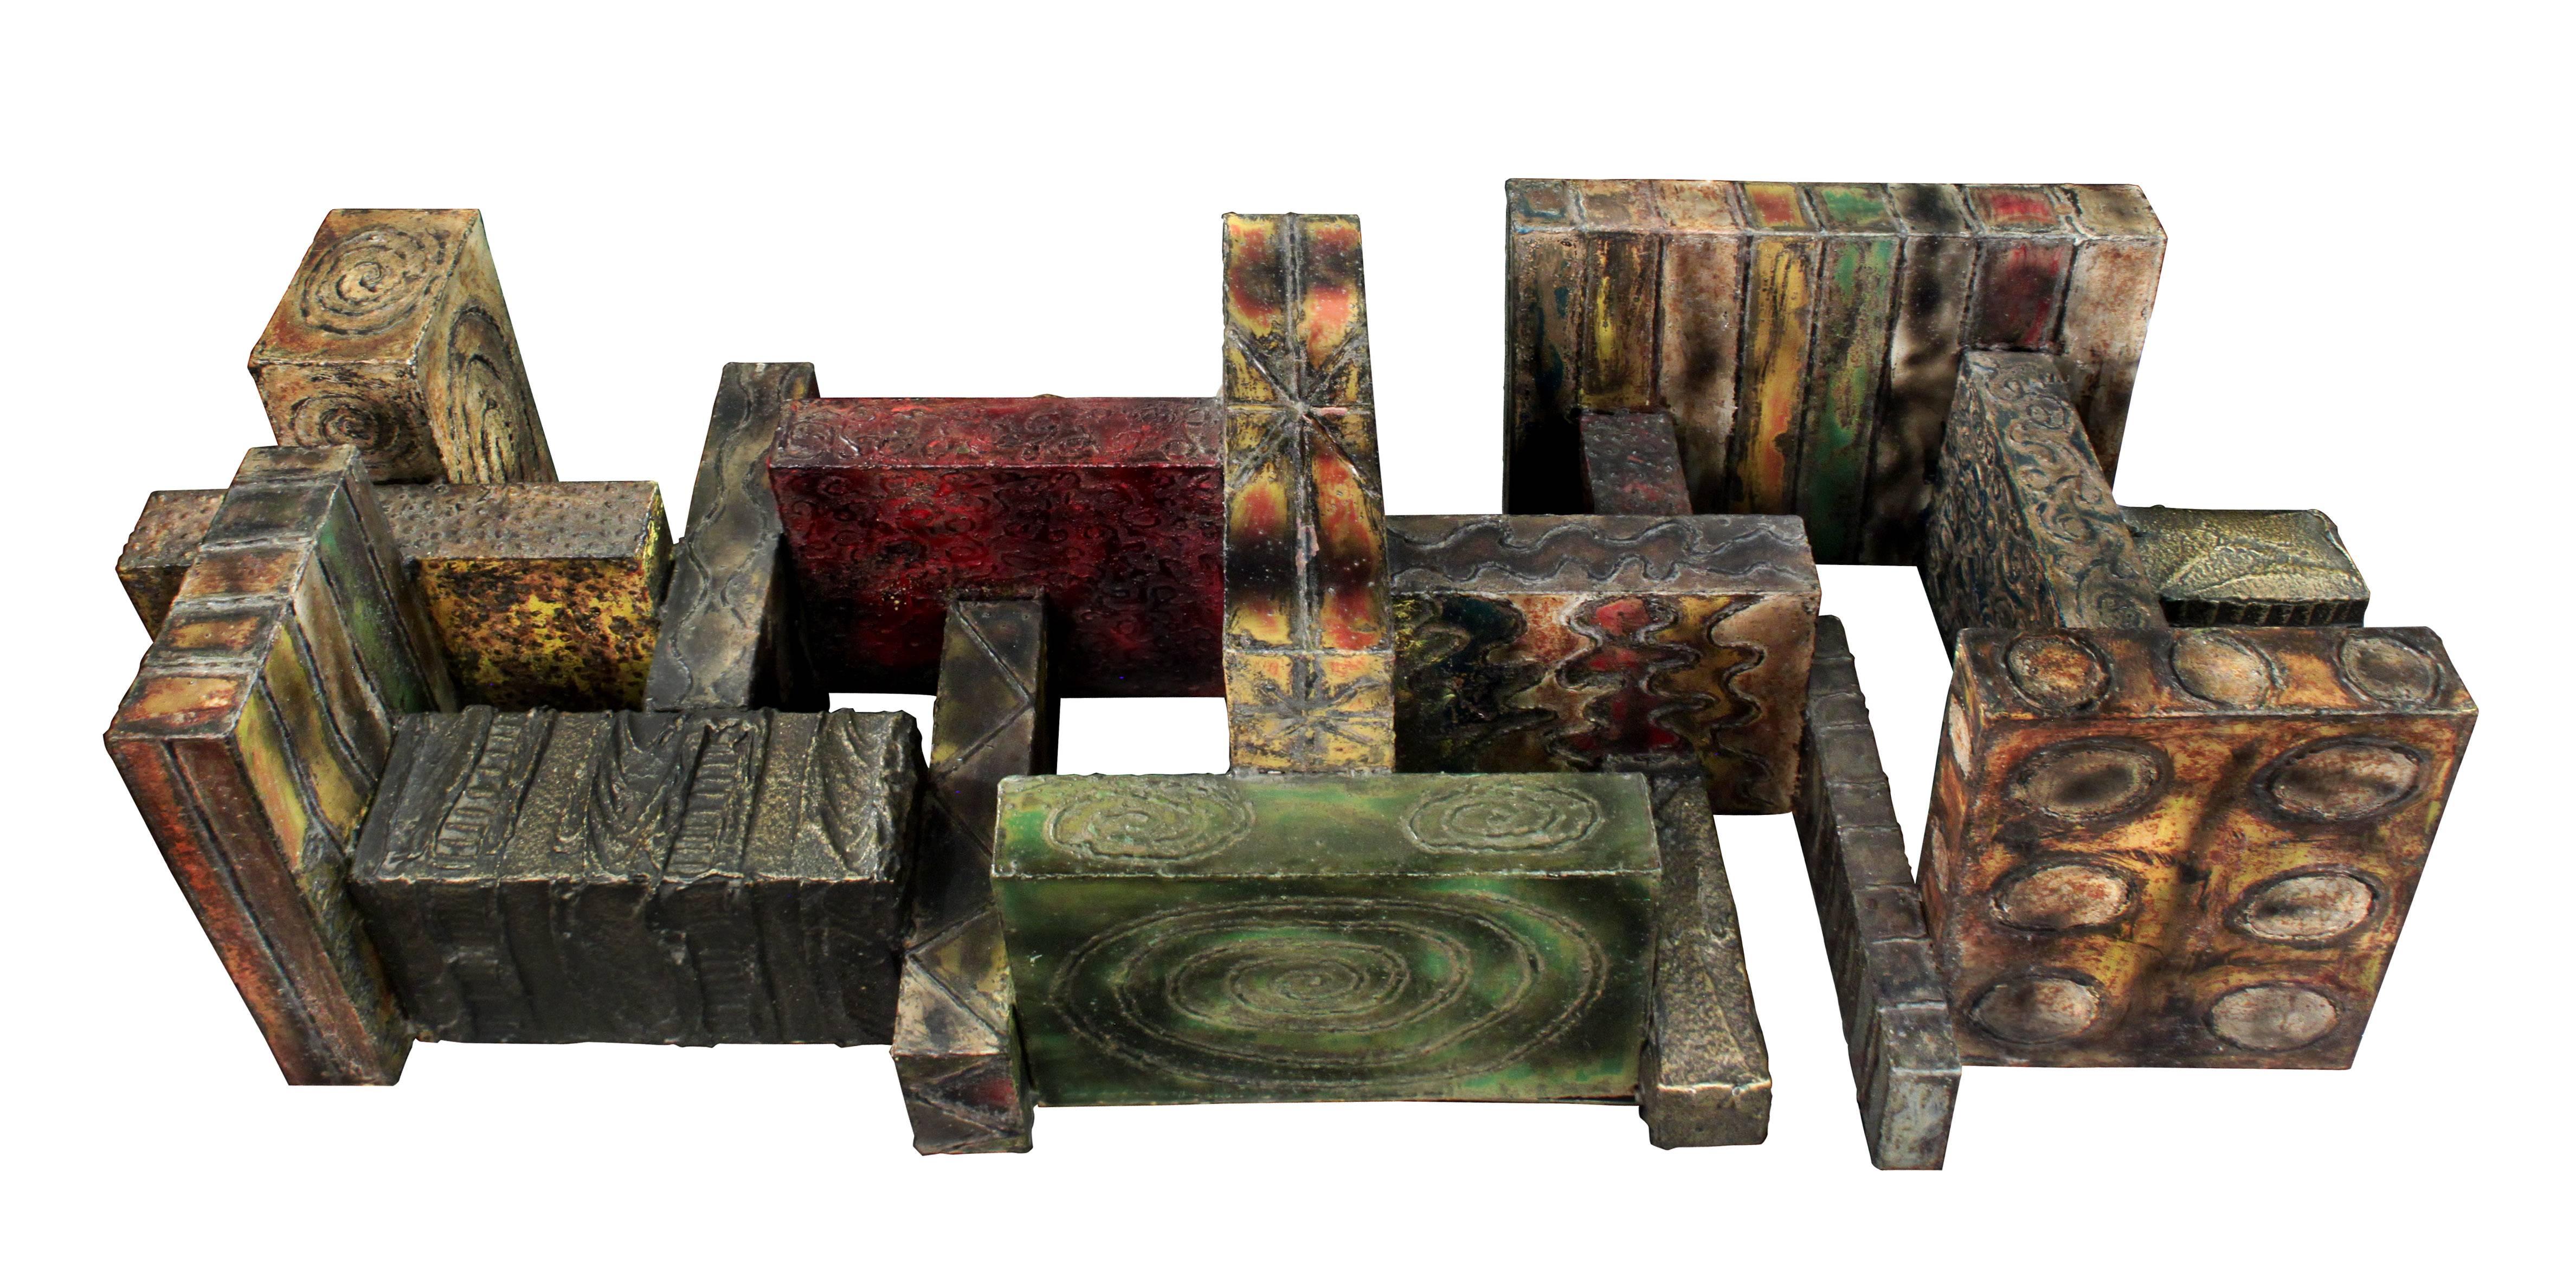 Rare and exceptional large studio coffee table, hand-welded and colored and also with bronze resin, by Paul Evans, American, 1971 (signed 